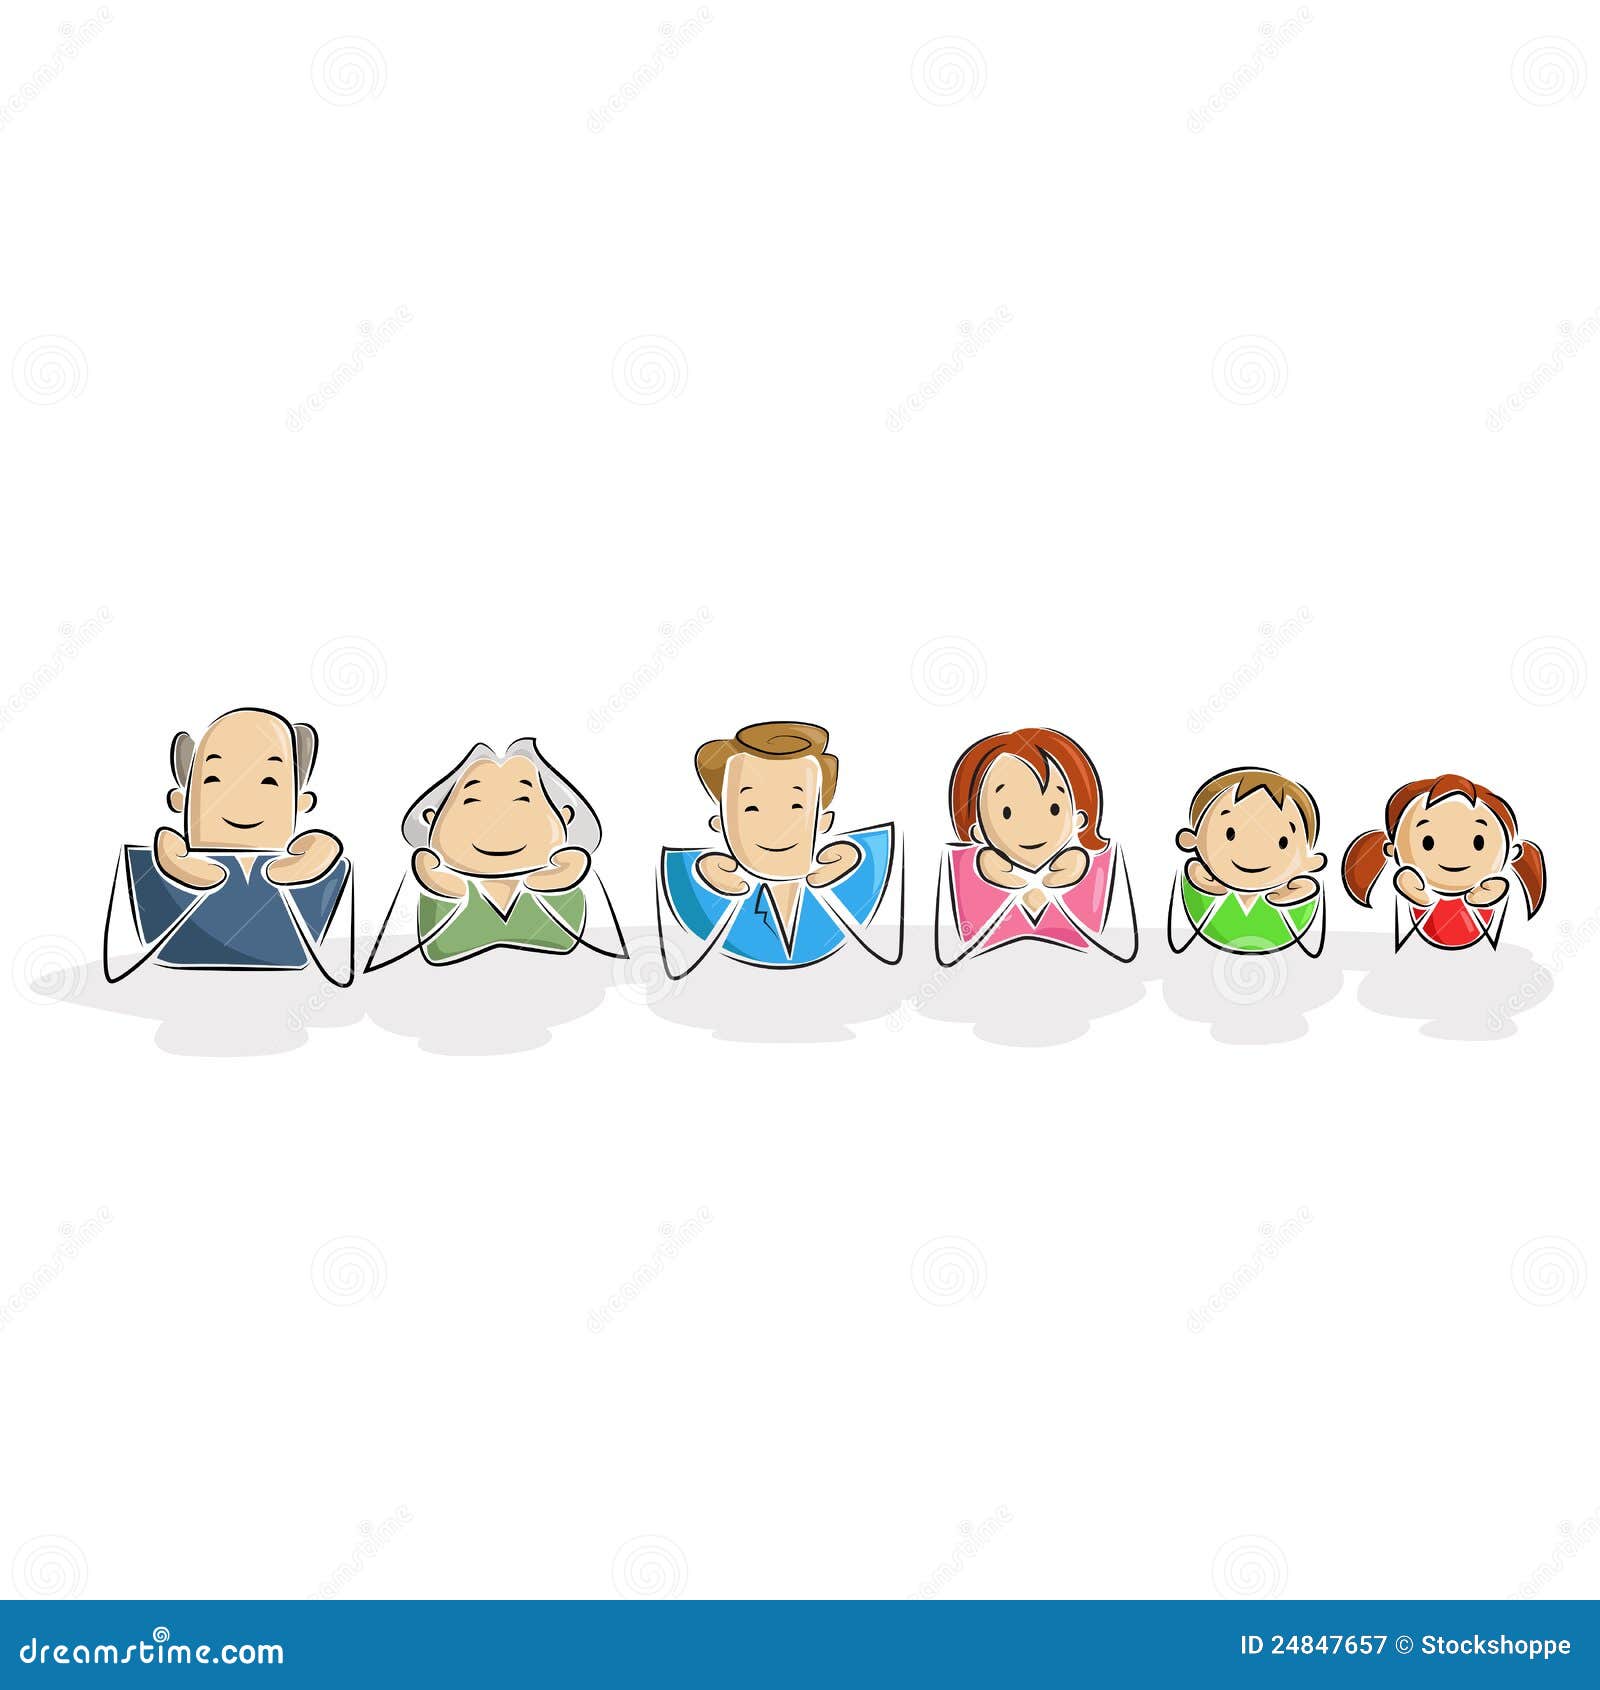 joint family clipart images - photo #14